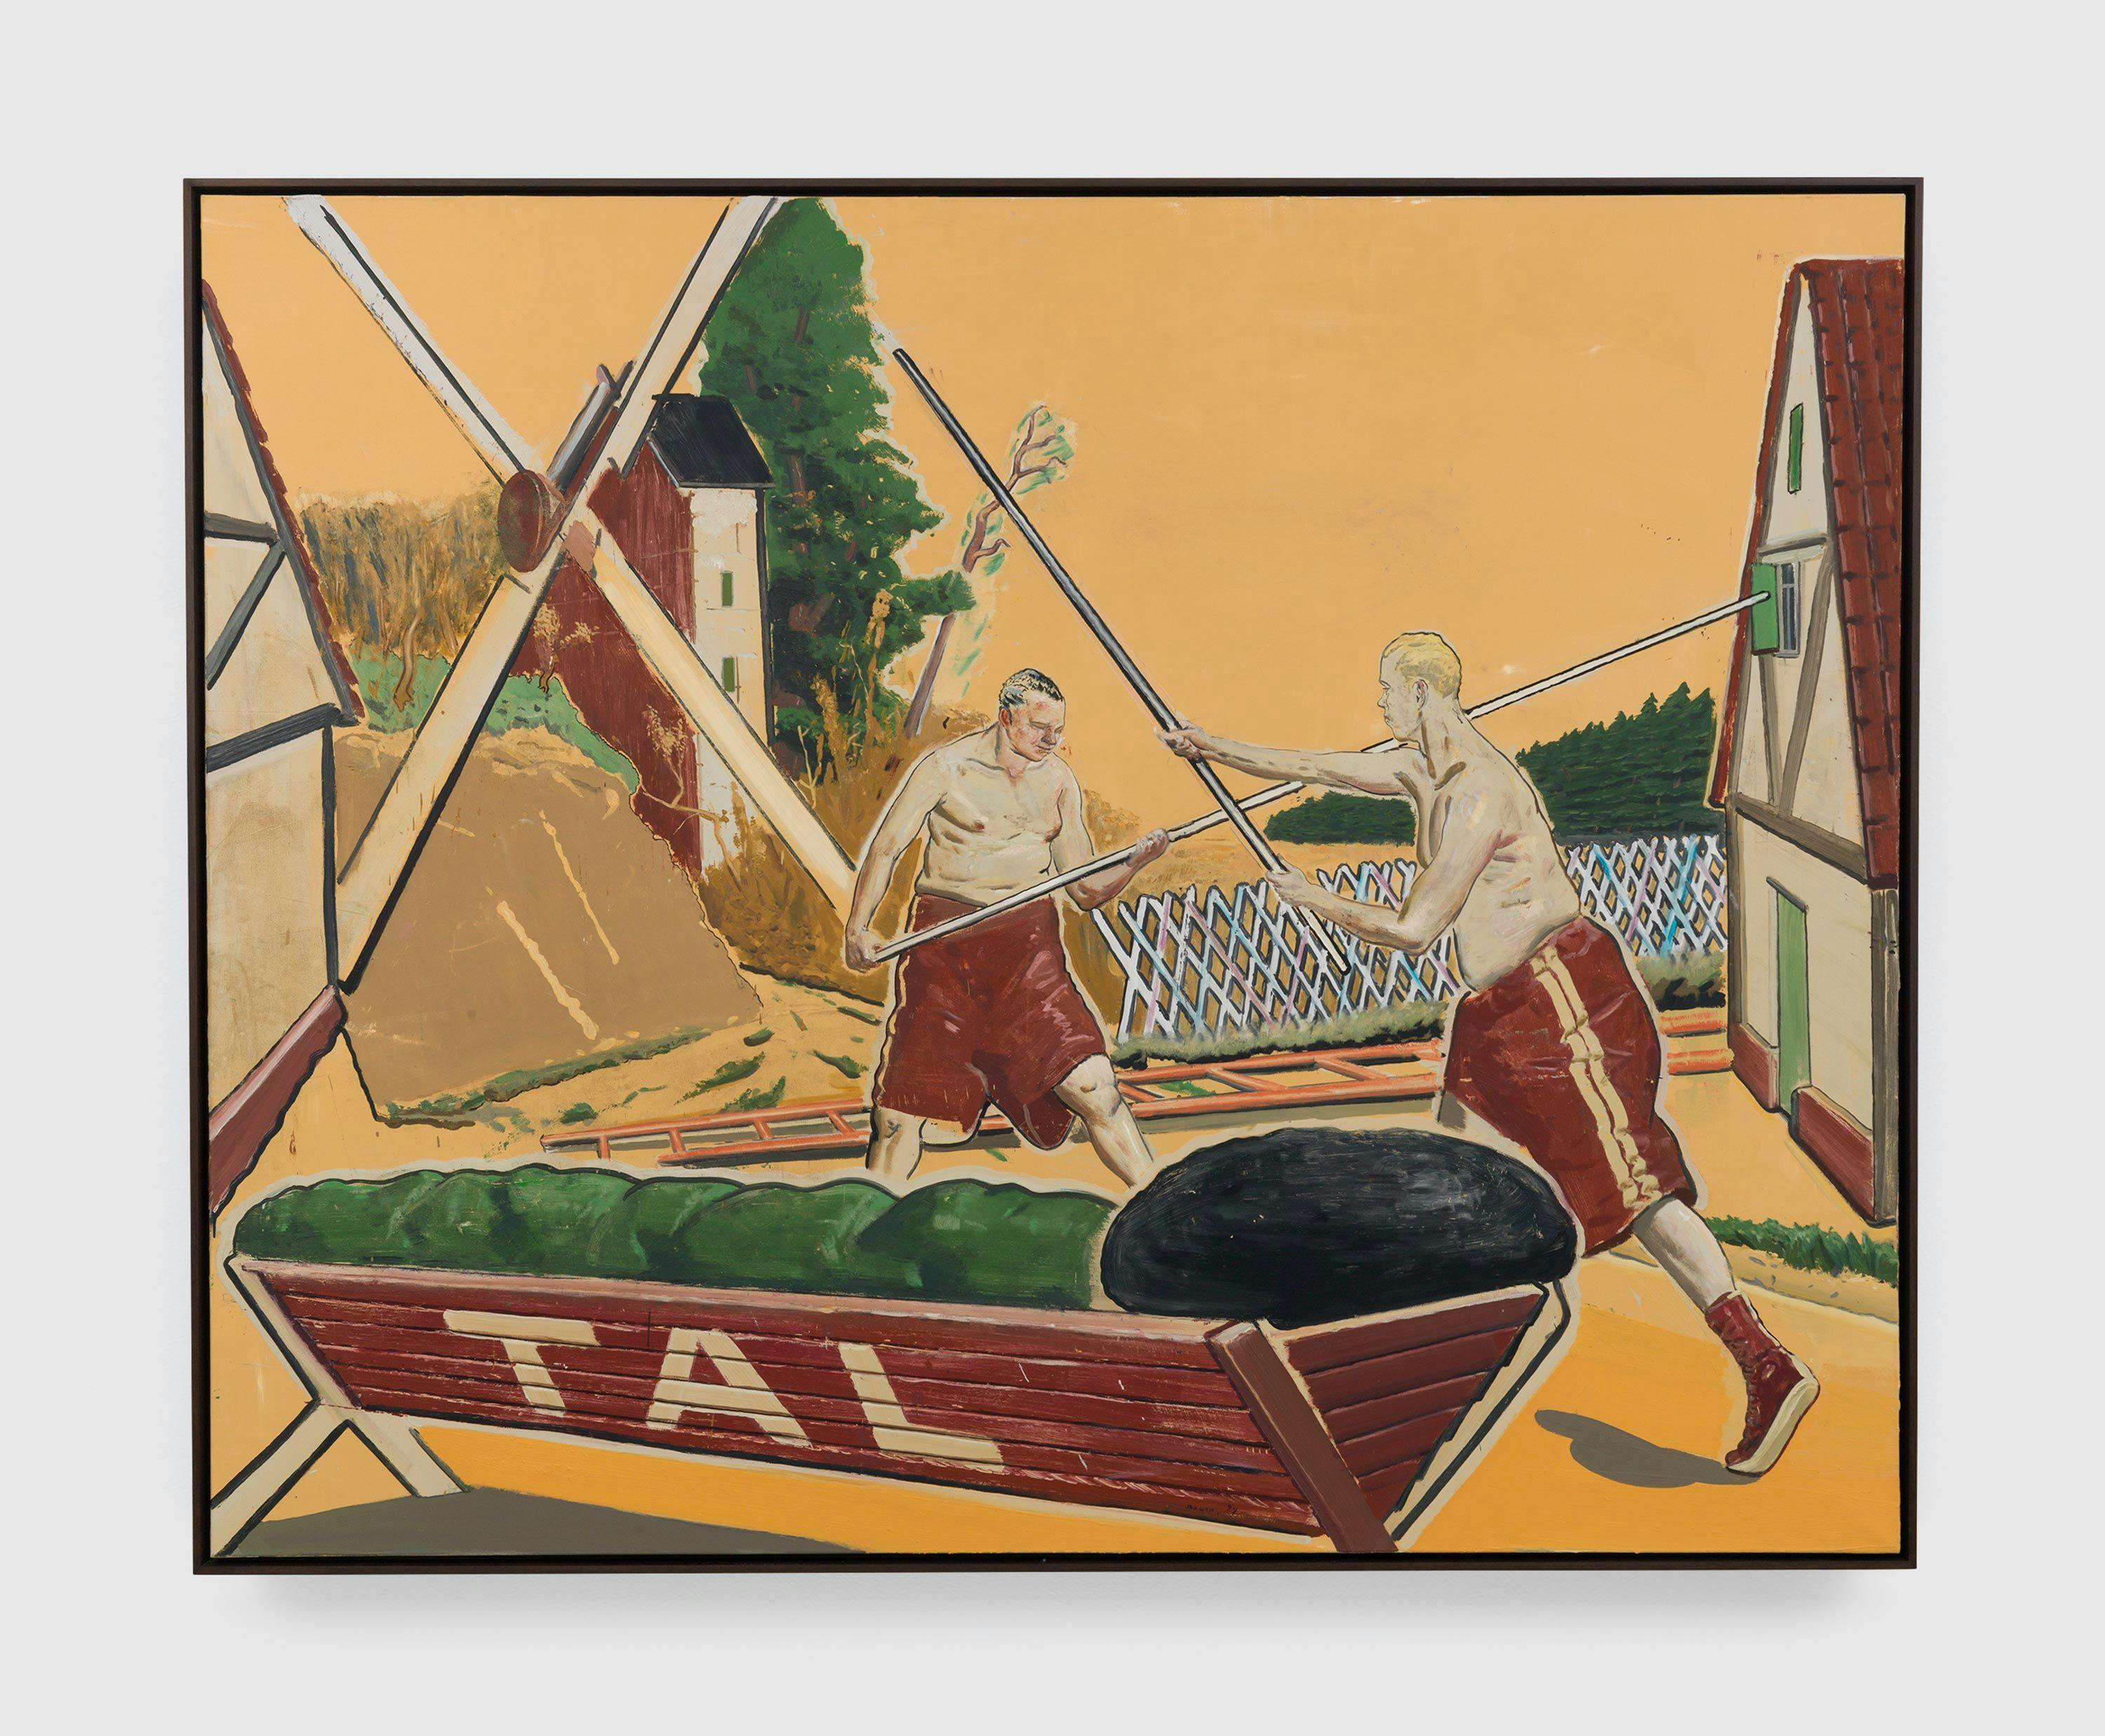 A painting by Neo Rauch, titled Tal, dated 1999.